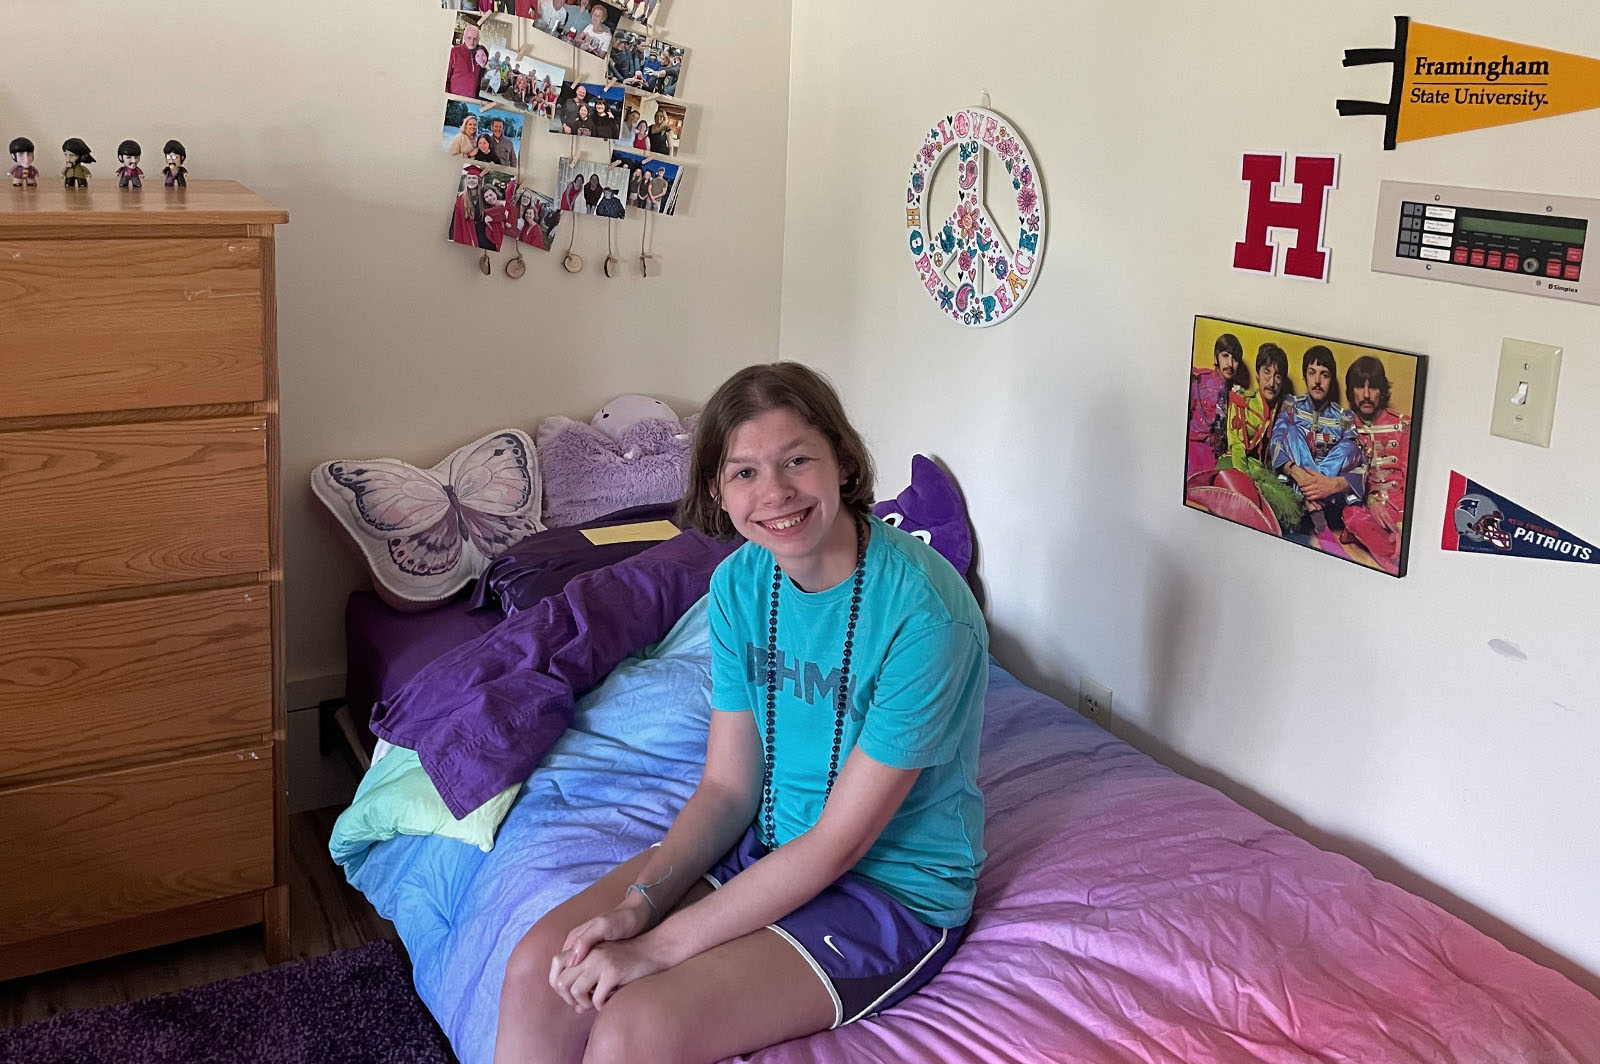 Teenage female in teal shirt sits on bed in college dorm room